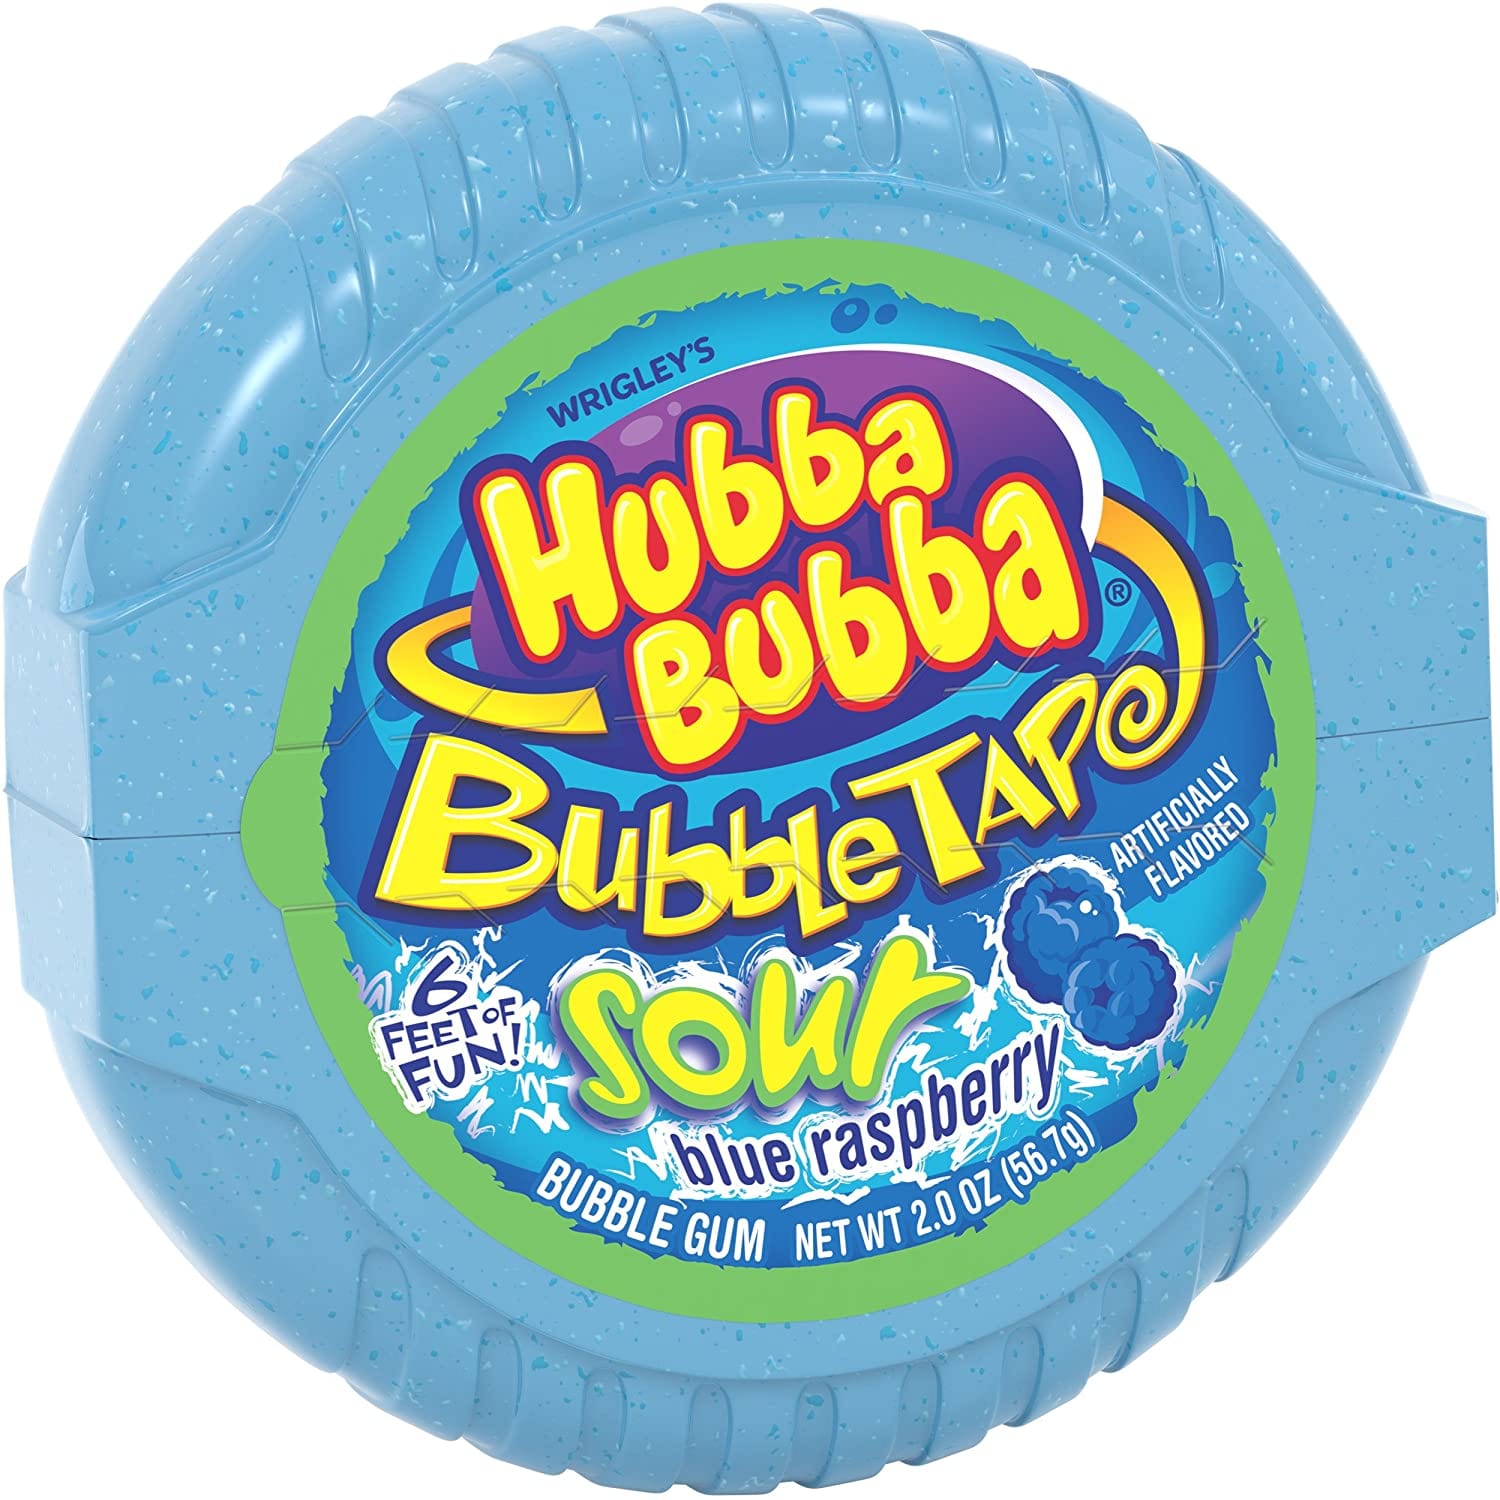 Buy Sour Blue Raspberry Bubble Tape in Bulk at Wholesale Prices